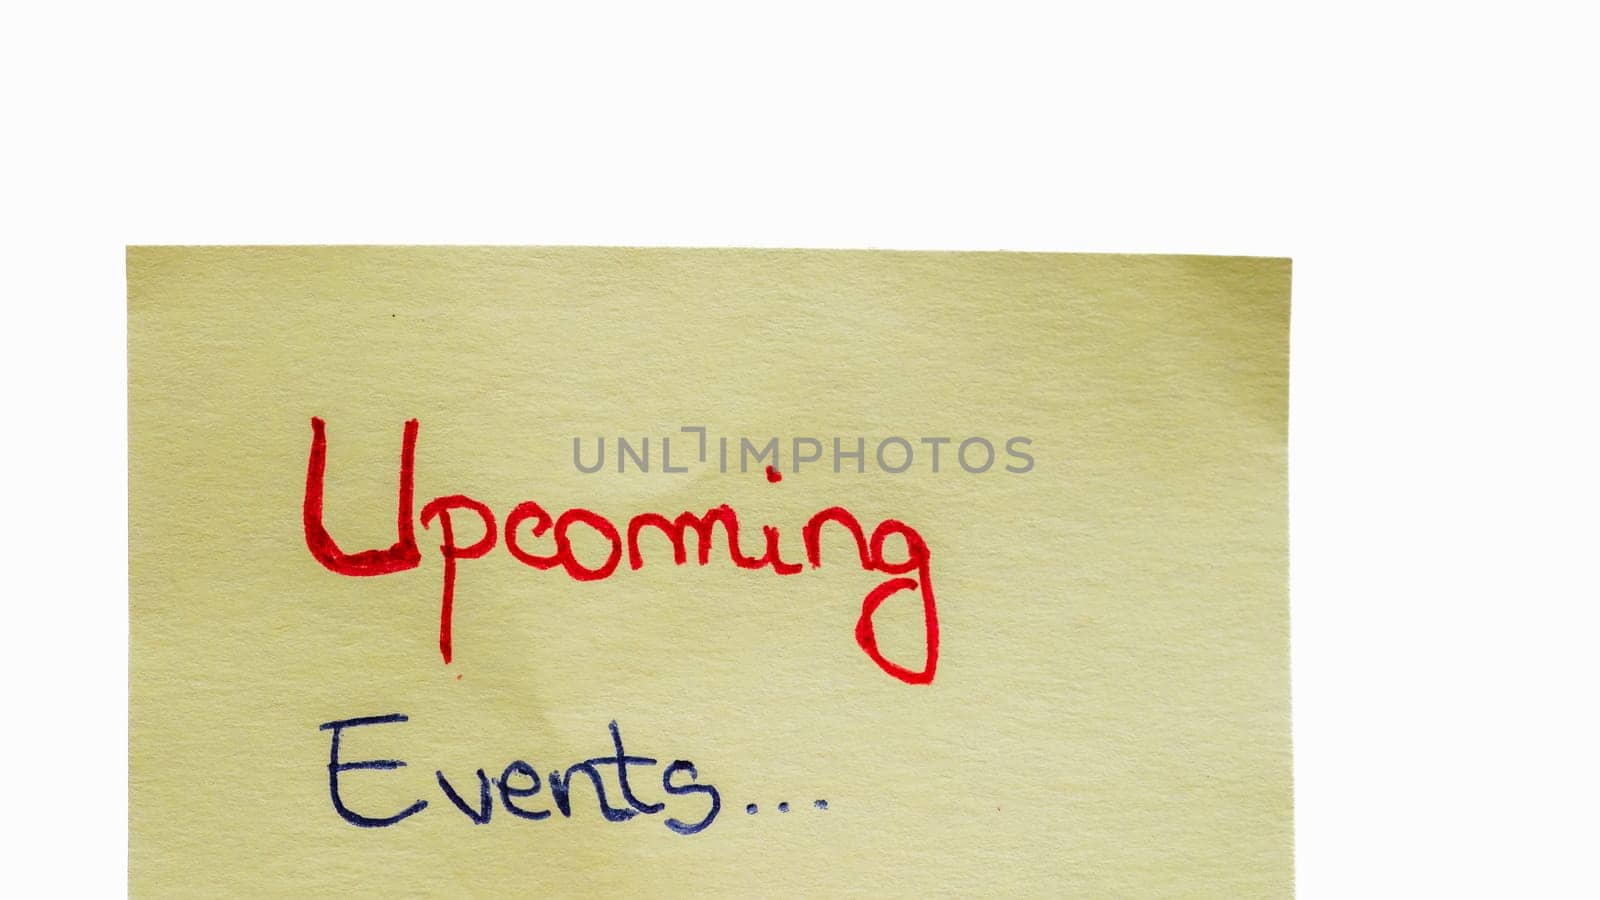 Upcoming events handwriting text close up isolated on yellow paper with copy space.